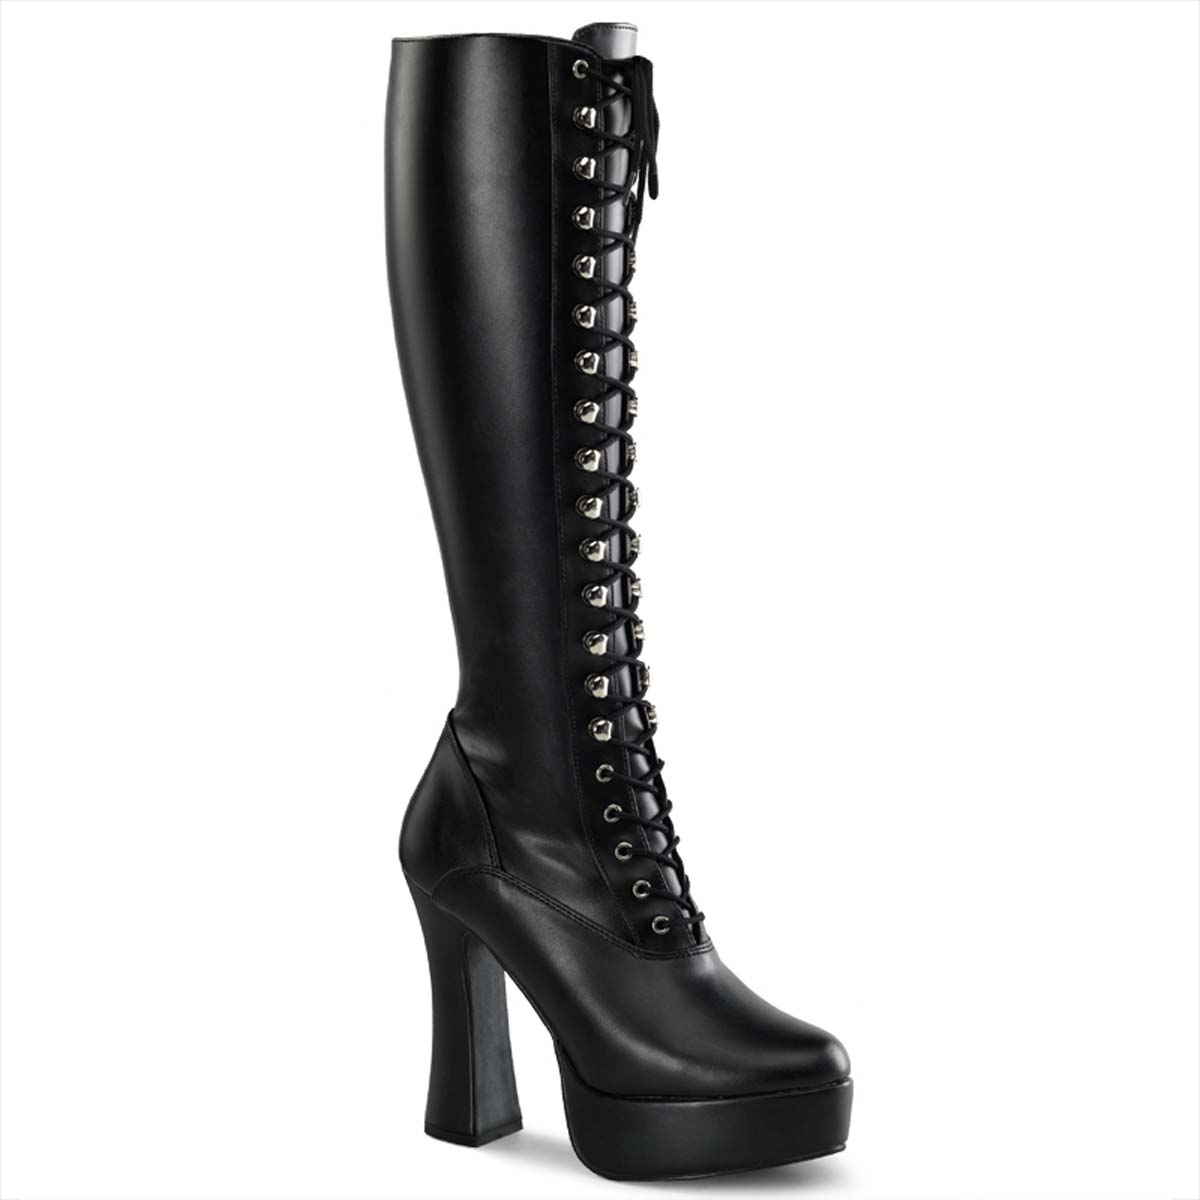 Pleaser Electra-2023 - Black Stretch Pu in Sexy Boots - $81.95